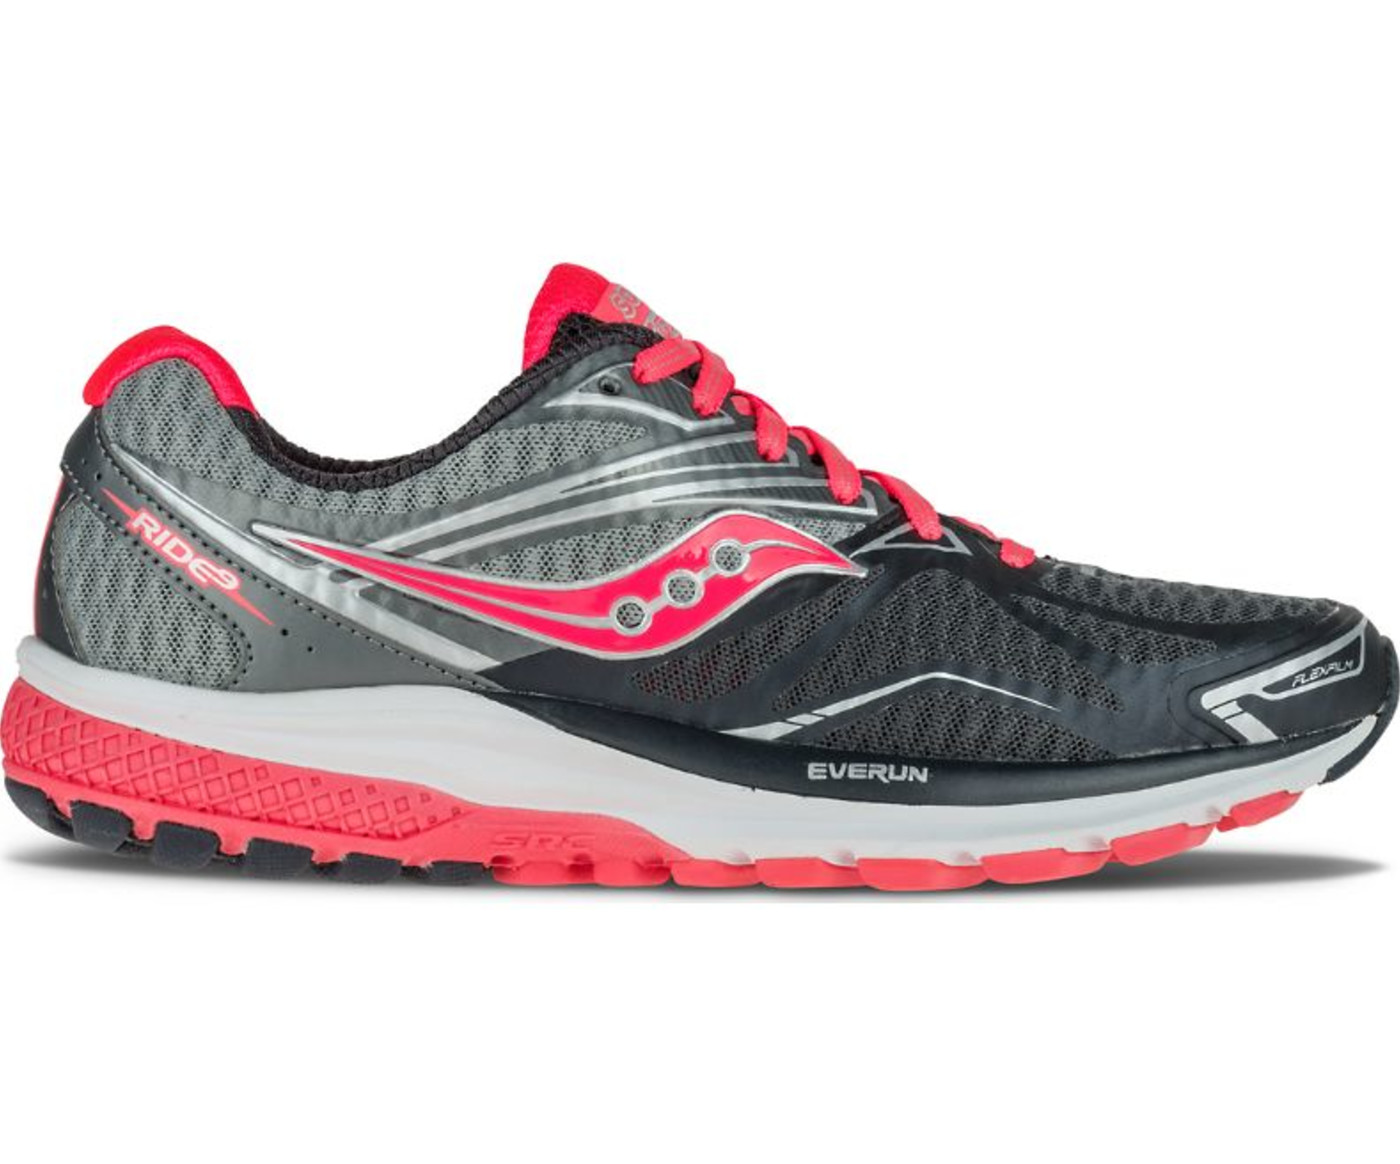 saucony shoes for high arches